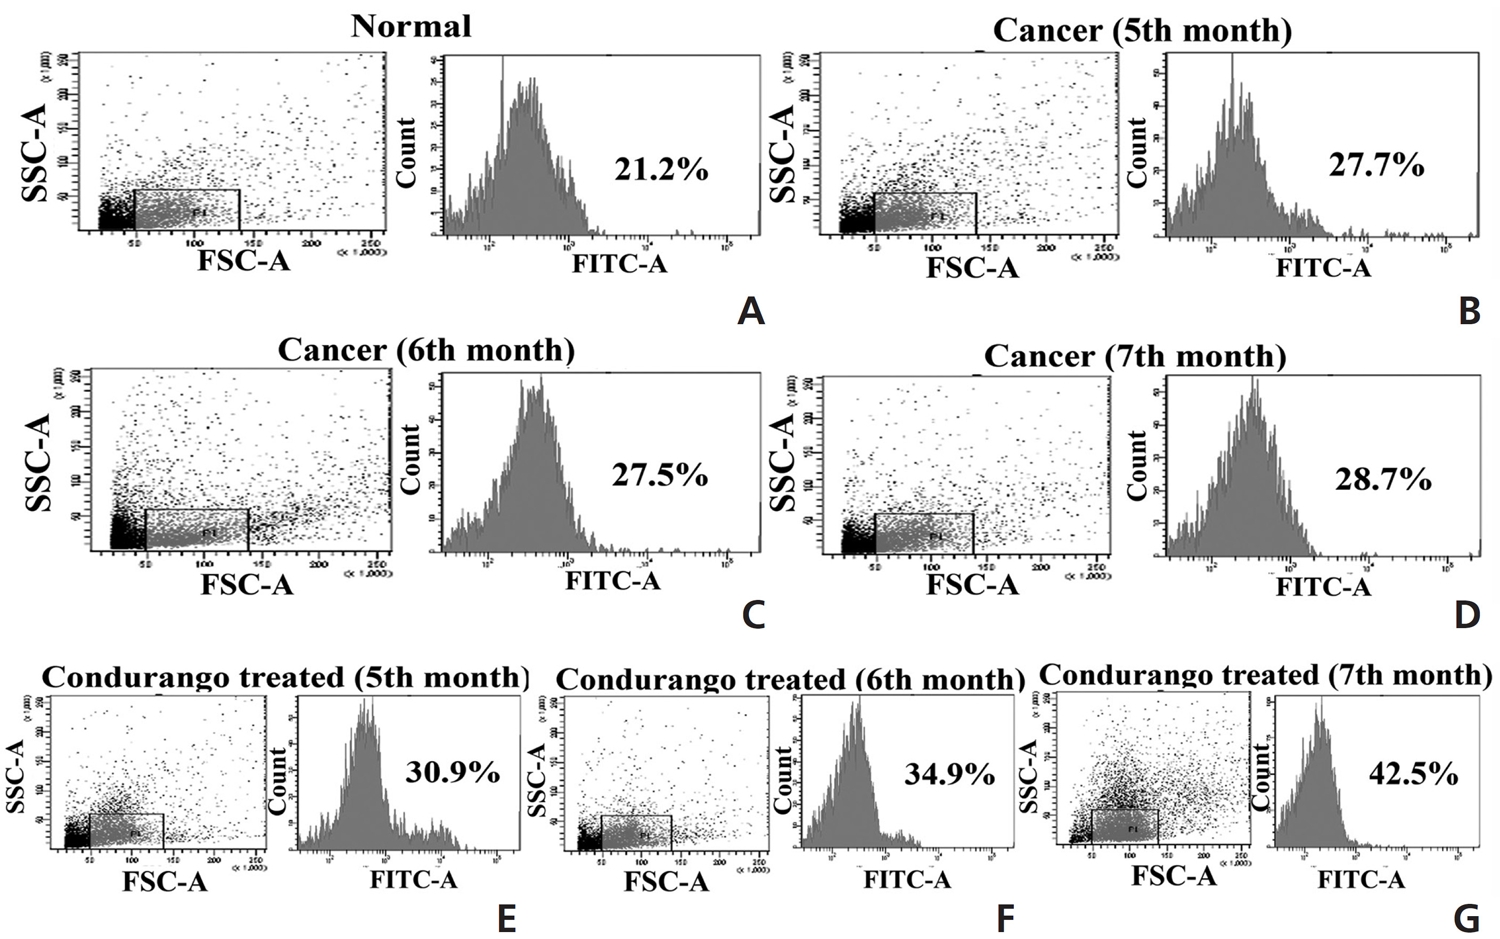 Analysis of ROS accumulation of perfused lung epithelial cells at different time points: (A) normal, (B)-(D) cancer at the 5th, 6th and 7th
month, respectively, and (E)-(G) drug-fed groups at the 5th, 6th and 7th month, respectively. FSC-A, Forwad light scatter-Area; SSC-A, side light
scatter-Area; FITC-A, Fluorescein insothiocyanate-Area.